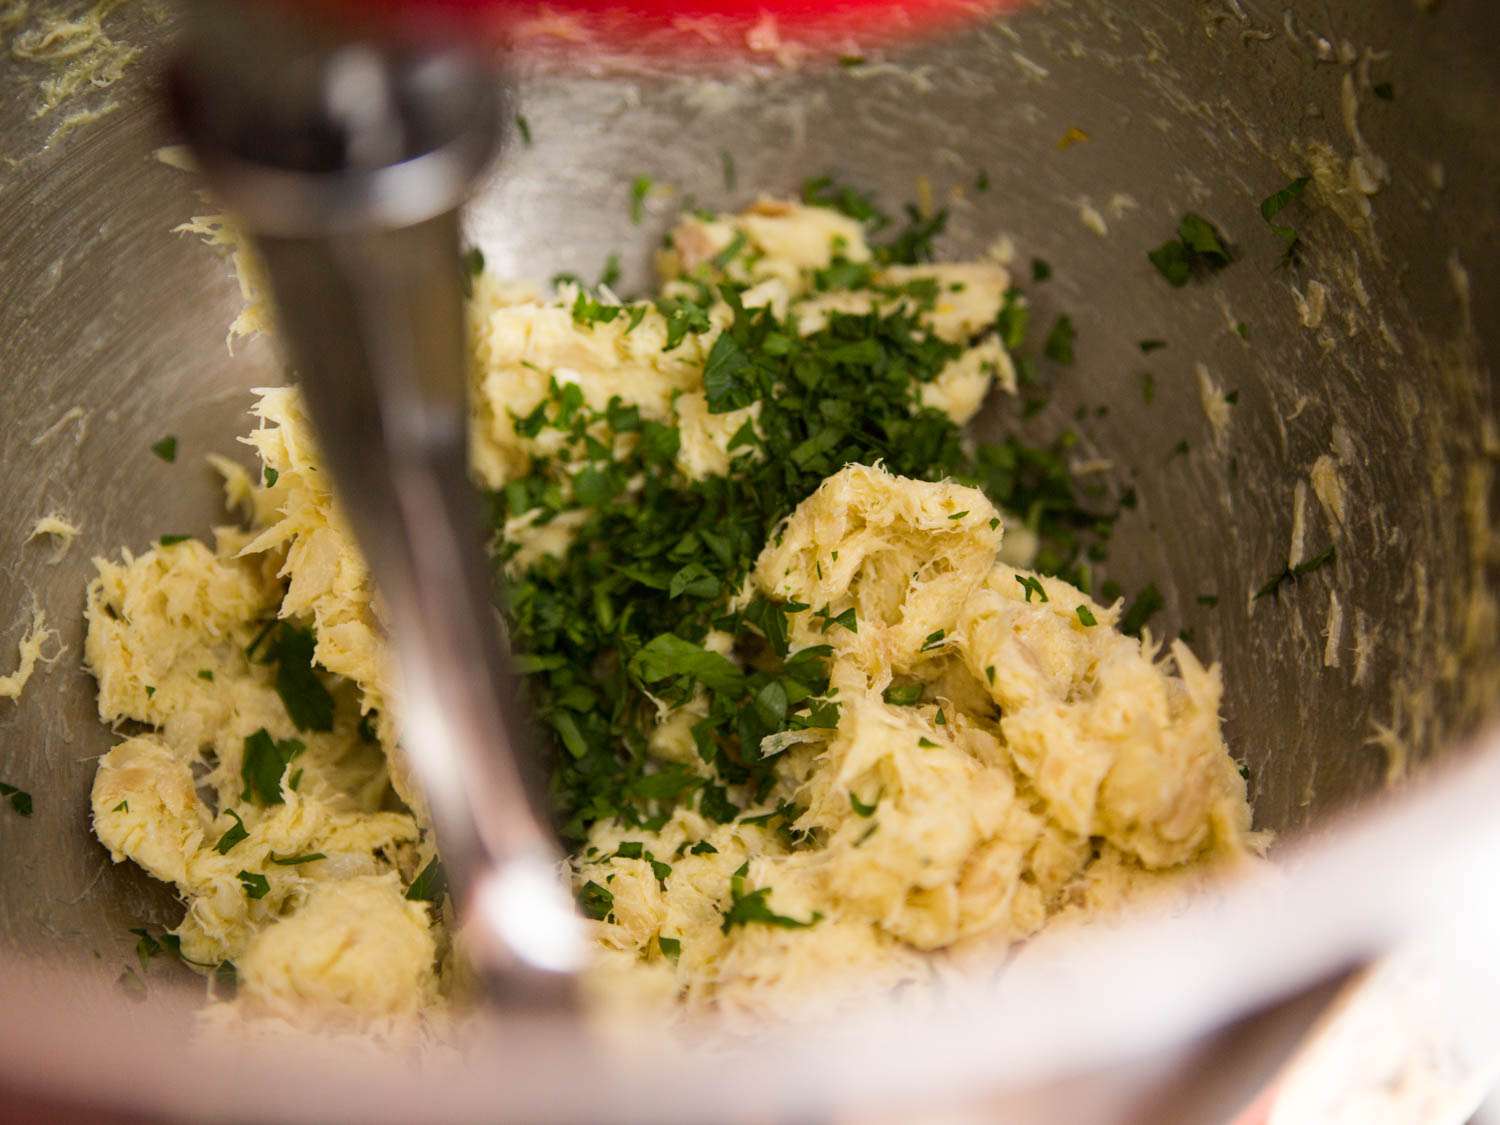 The brandade in the bowl of a stand mixer with lemon zest and parsley added.